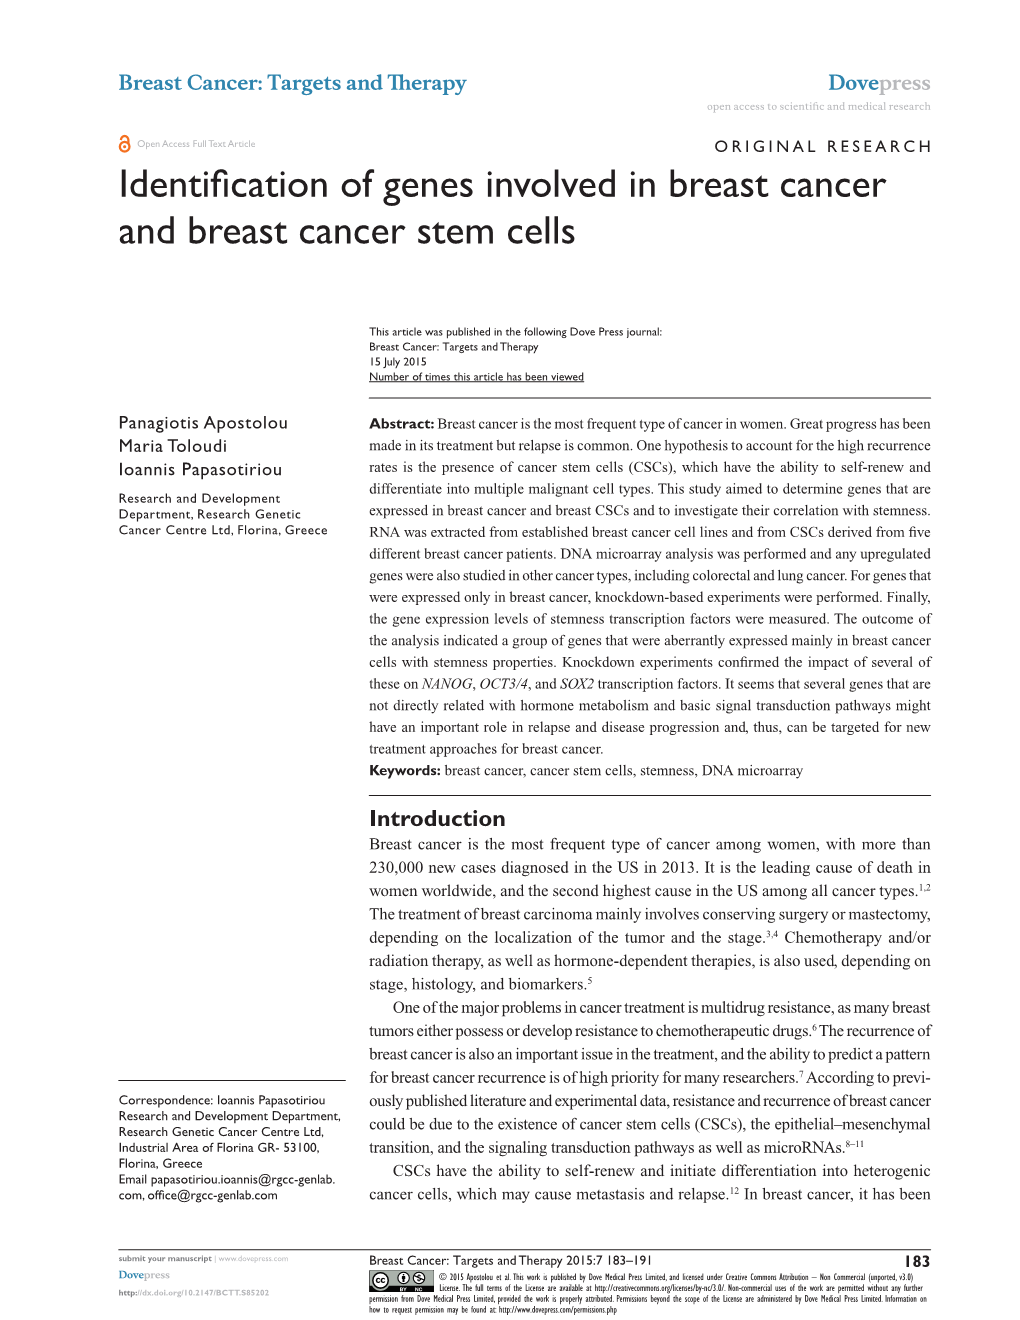 Identification of Genes Involved in Breast Cancer and Breast Cancer Stem Cells